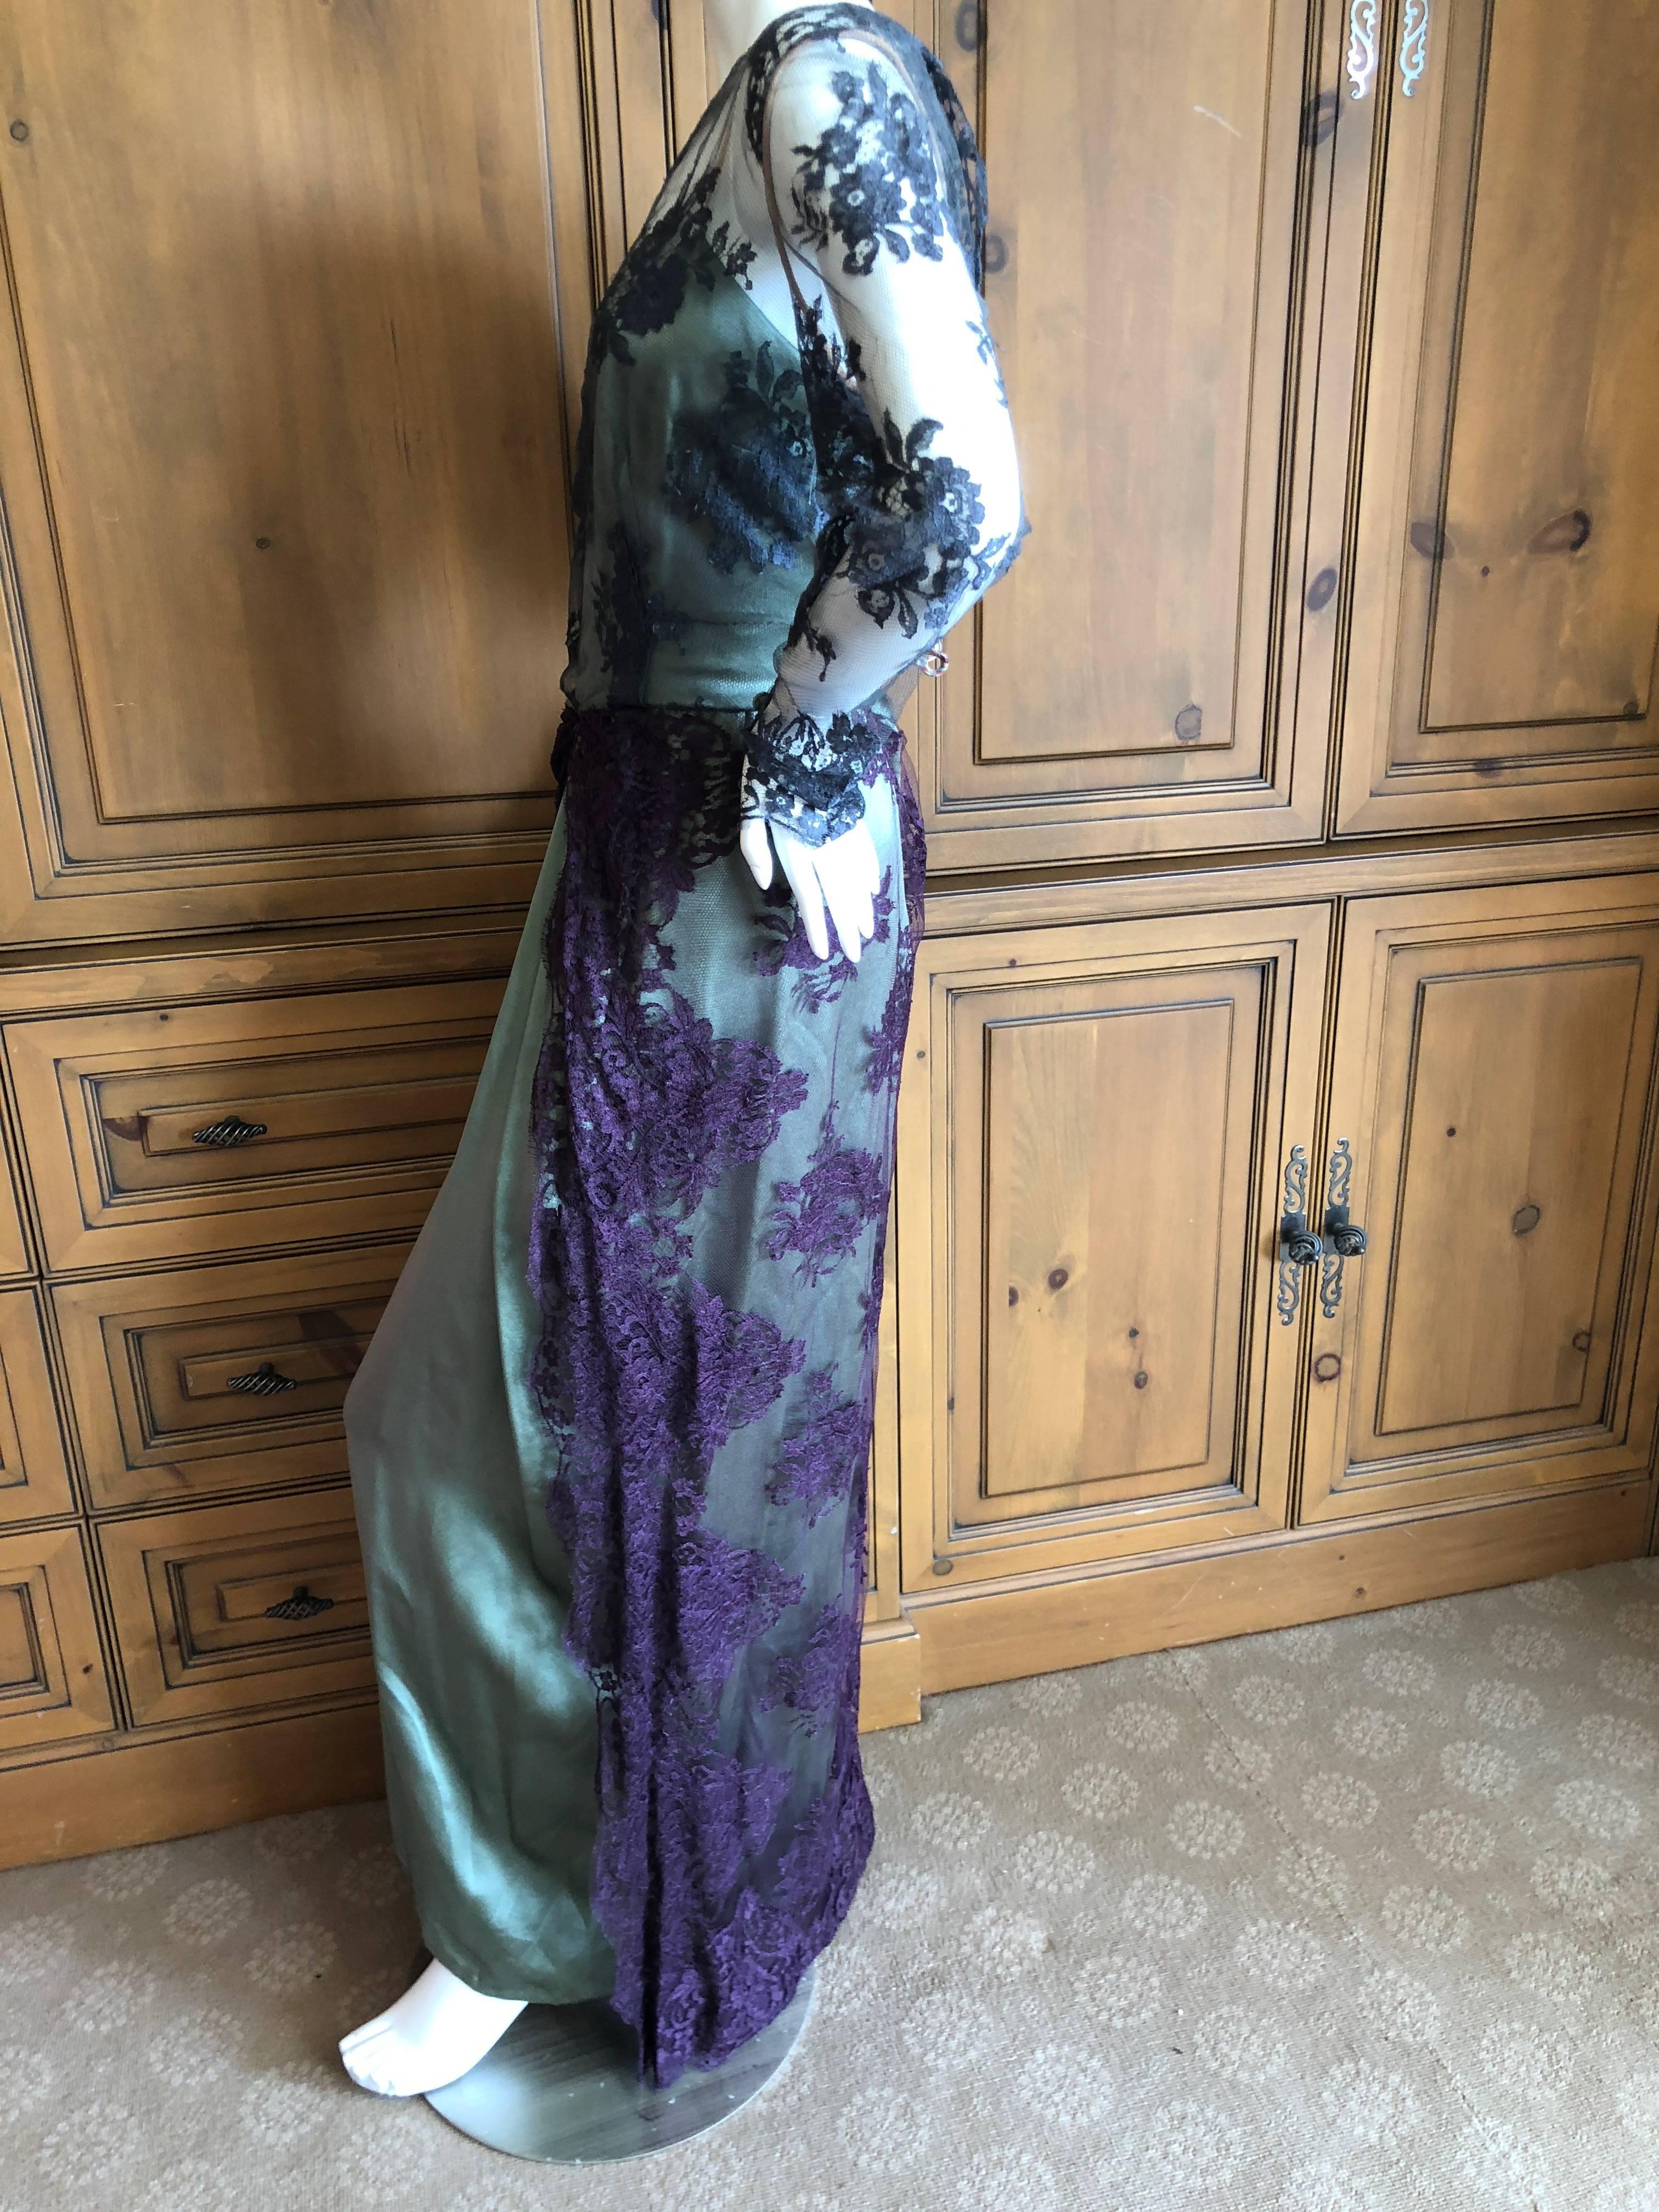 Bill Blass Vintage 1970's Silk Evening Dress with Lace Overlay Details For Sale 6